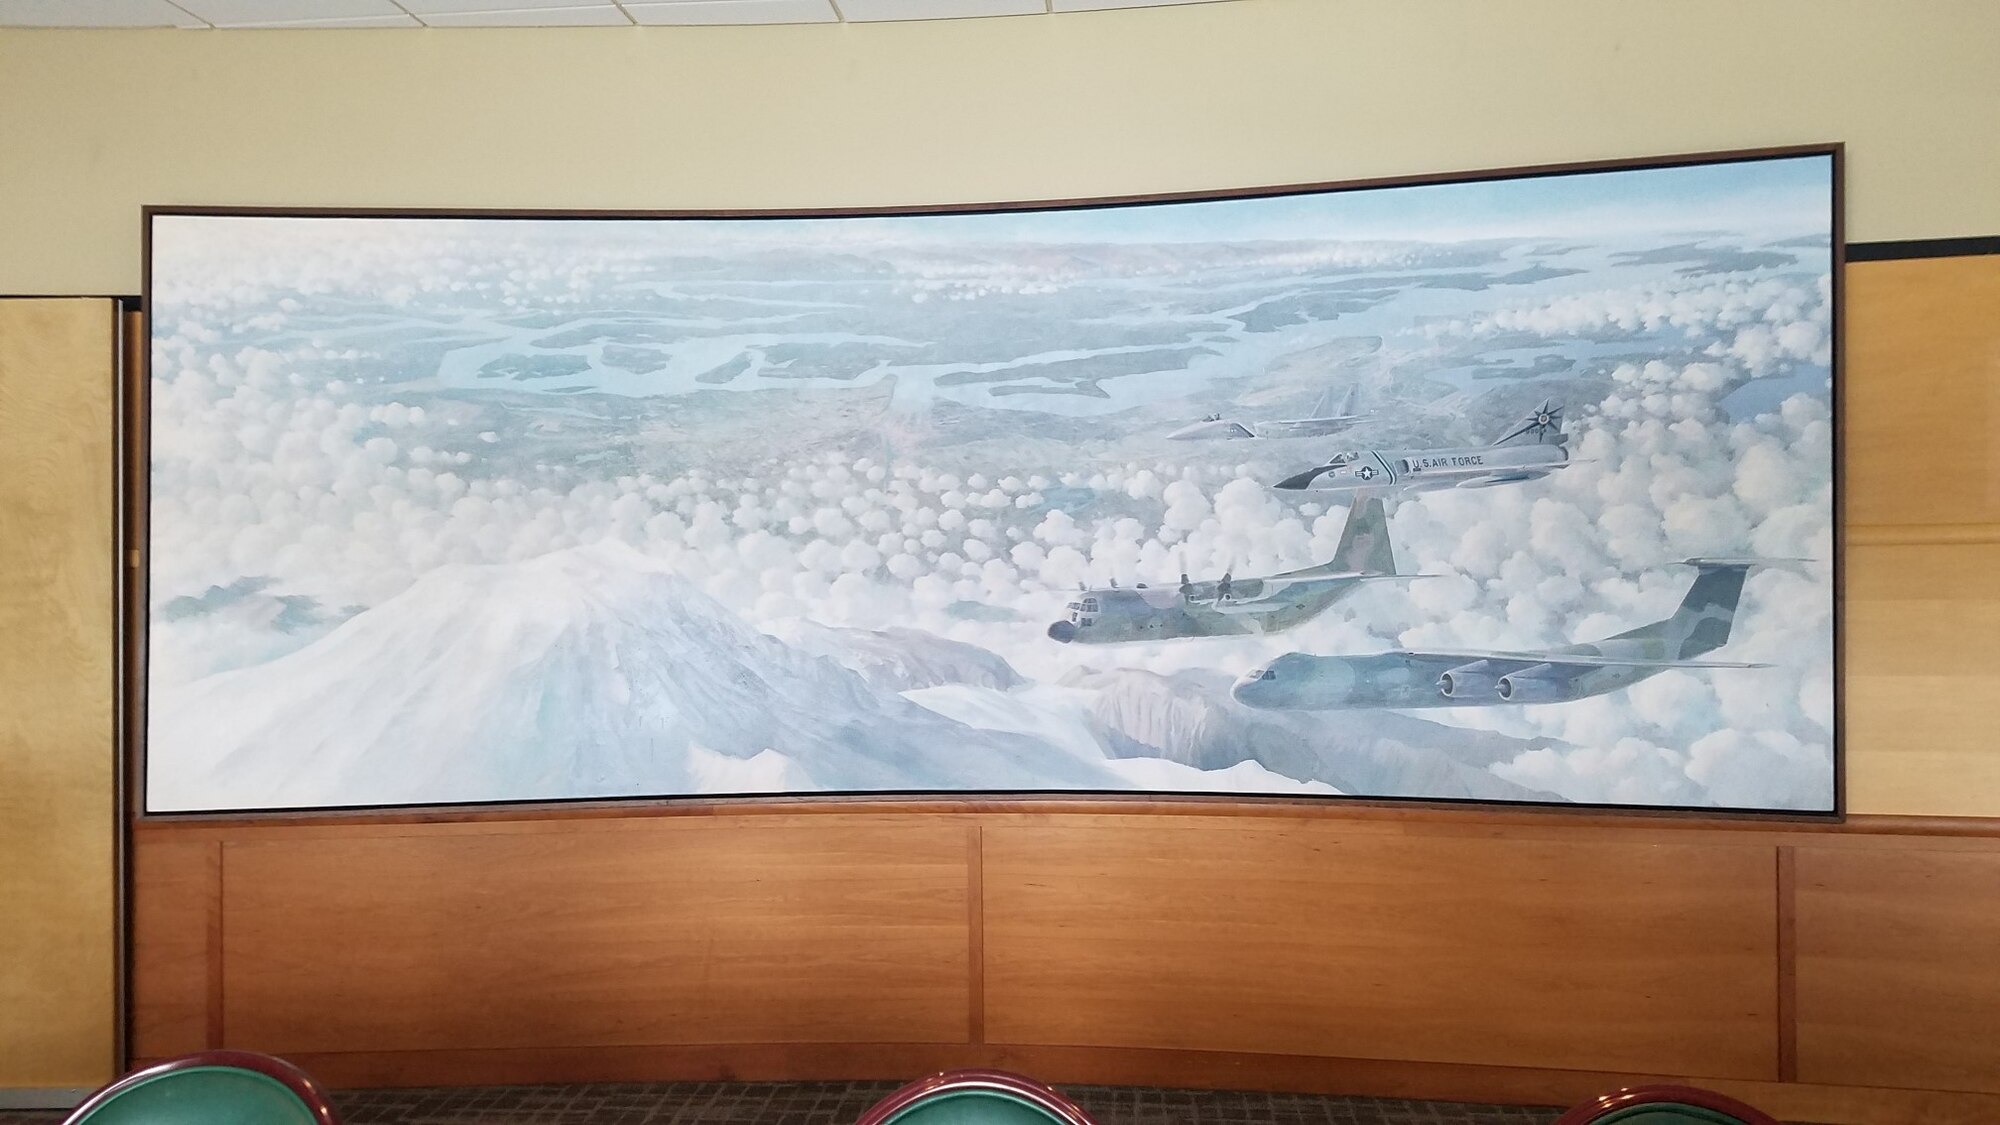 A painting titled “McChord Country” by Keith Ferris, a Hawaiian aviation artist, hangs inside the McChord Pub at Joint Base Lewis-McChord, Washington, Feb. 23, 2019. Ferris completed the painting in 1982, and after its completion it was placed in the McChord Pub for the next four decades. (Courtesy photo)